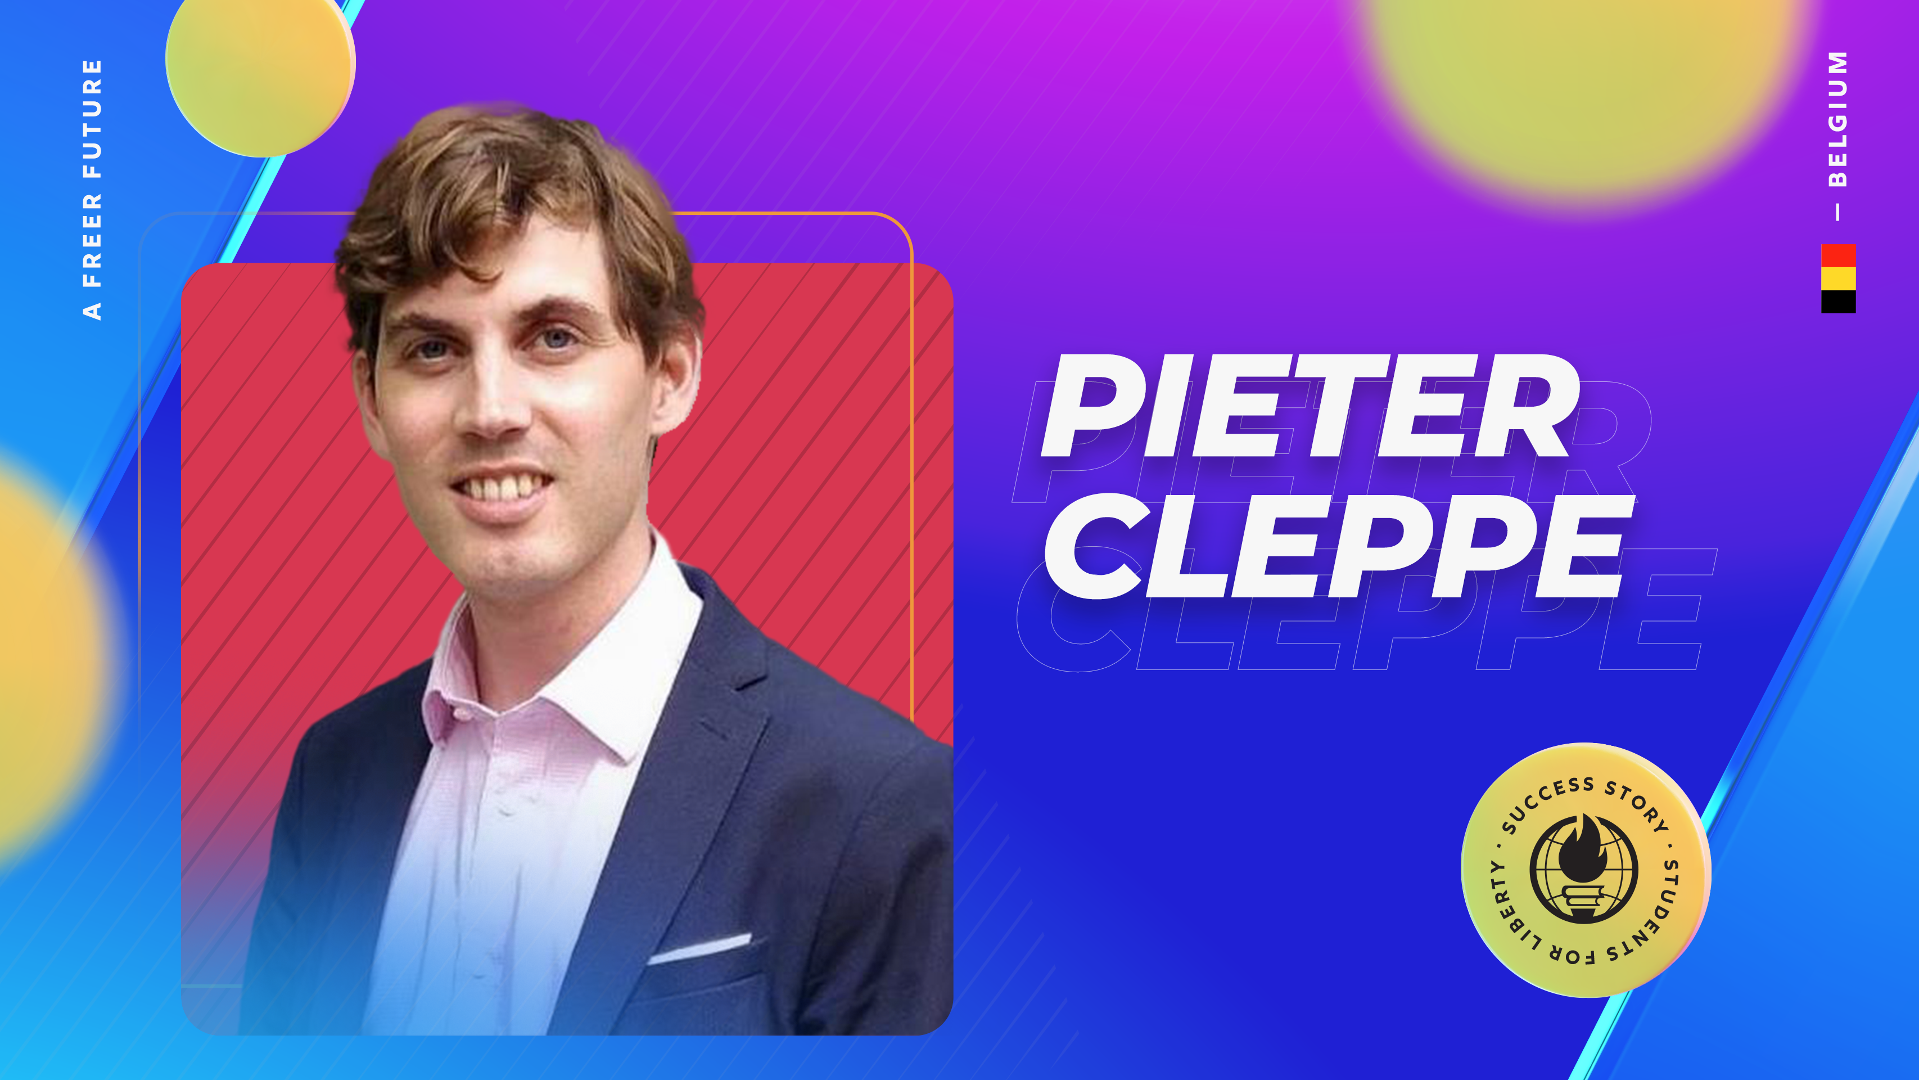 In Brussels, the epicenter of EU politics, one man has spent years working to promote liberty and free markets. That man is Pieter Cleppe, an SFL alumnus